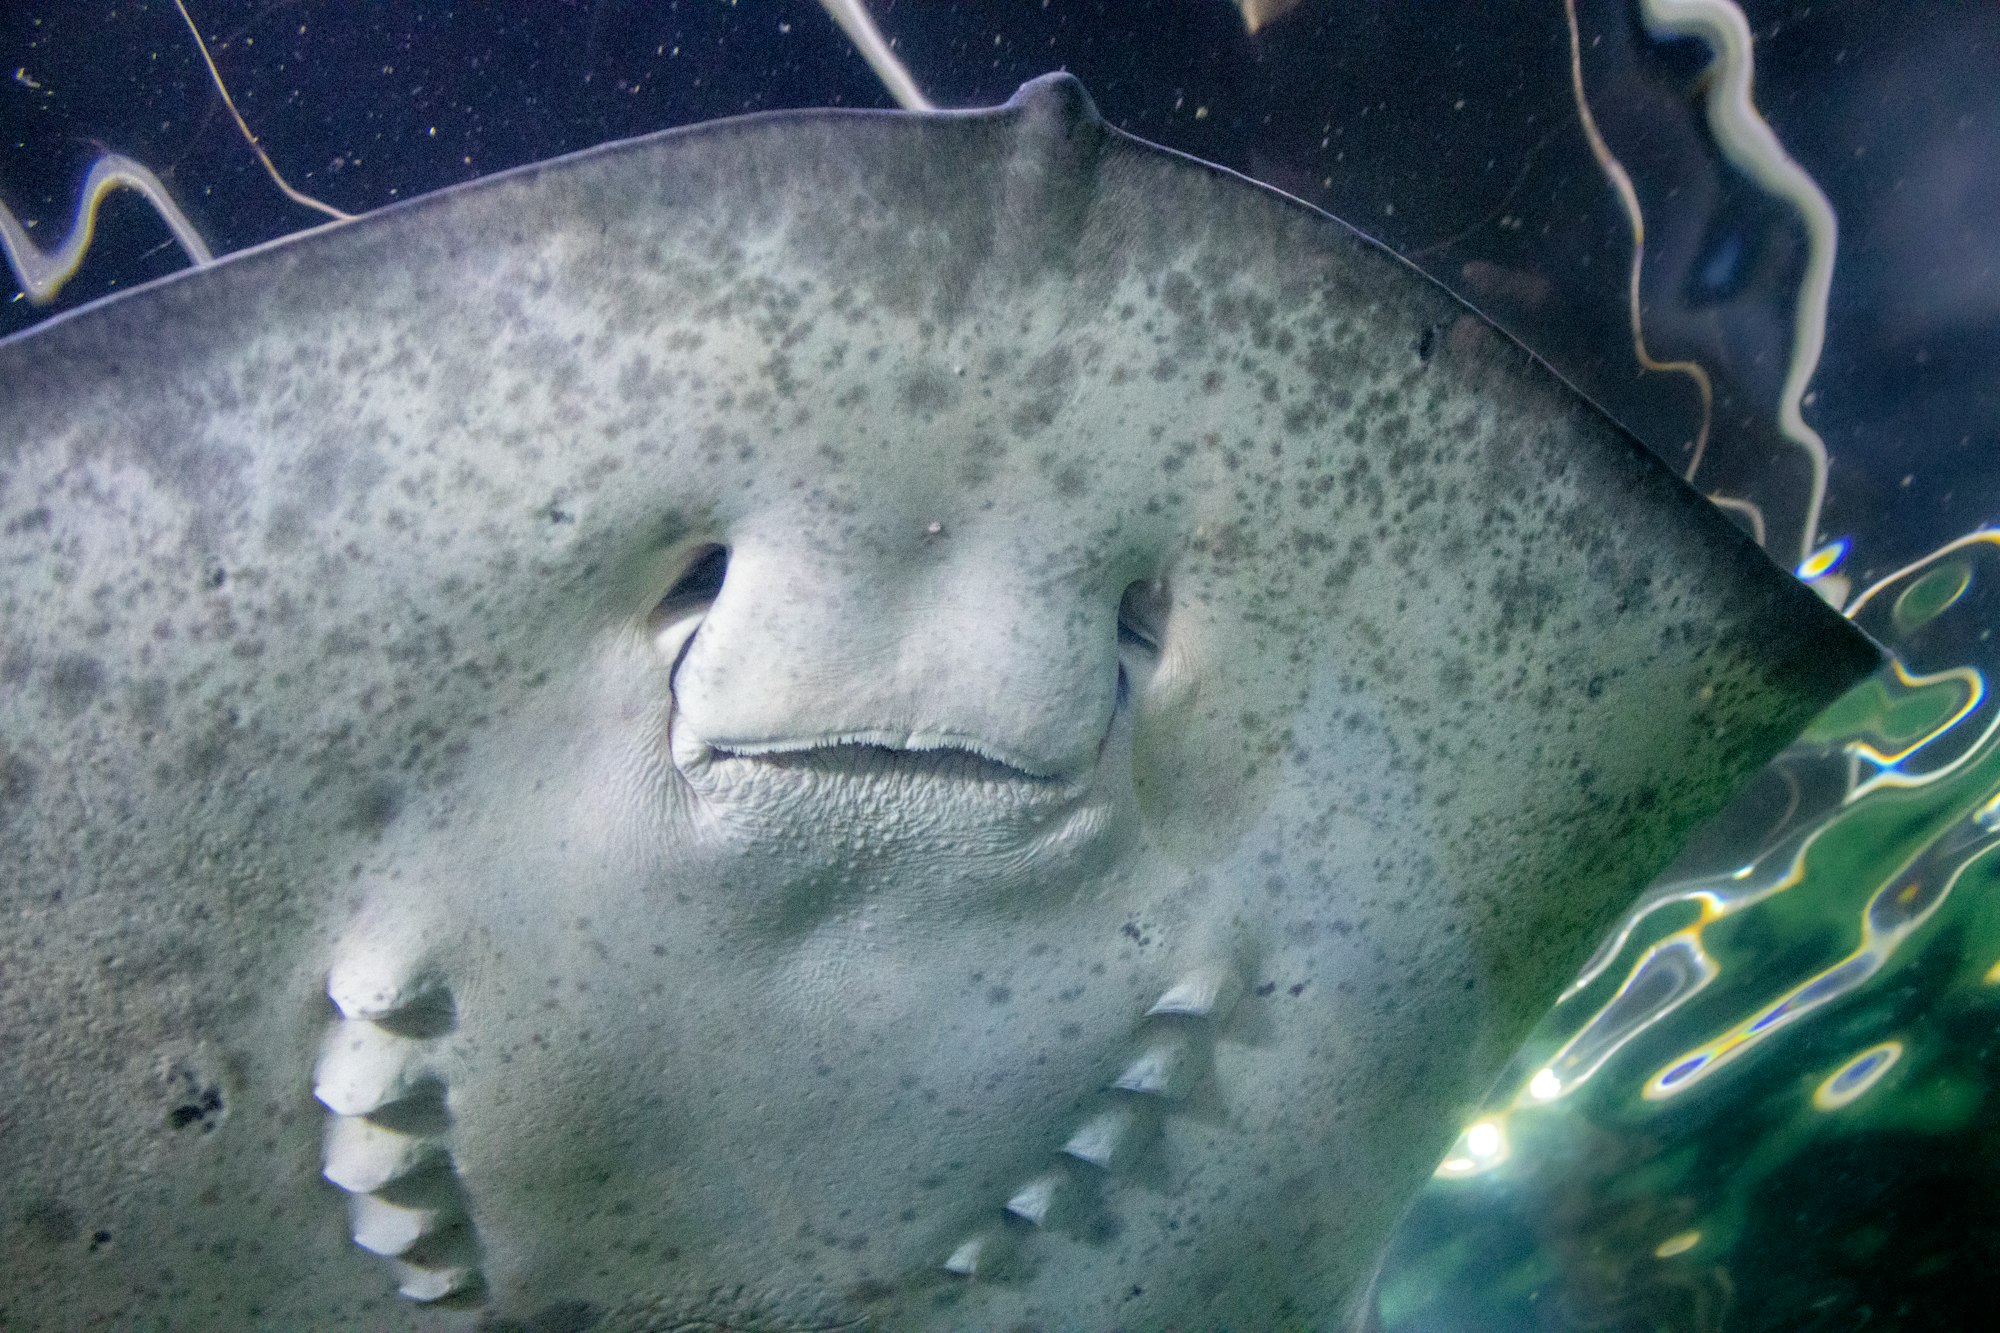 green stingray in close up photography and smiling